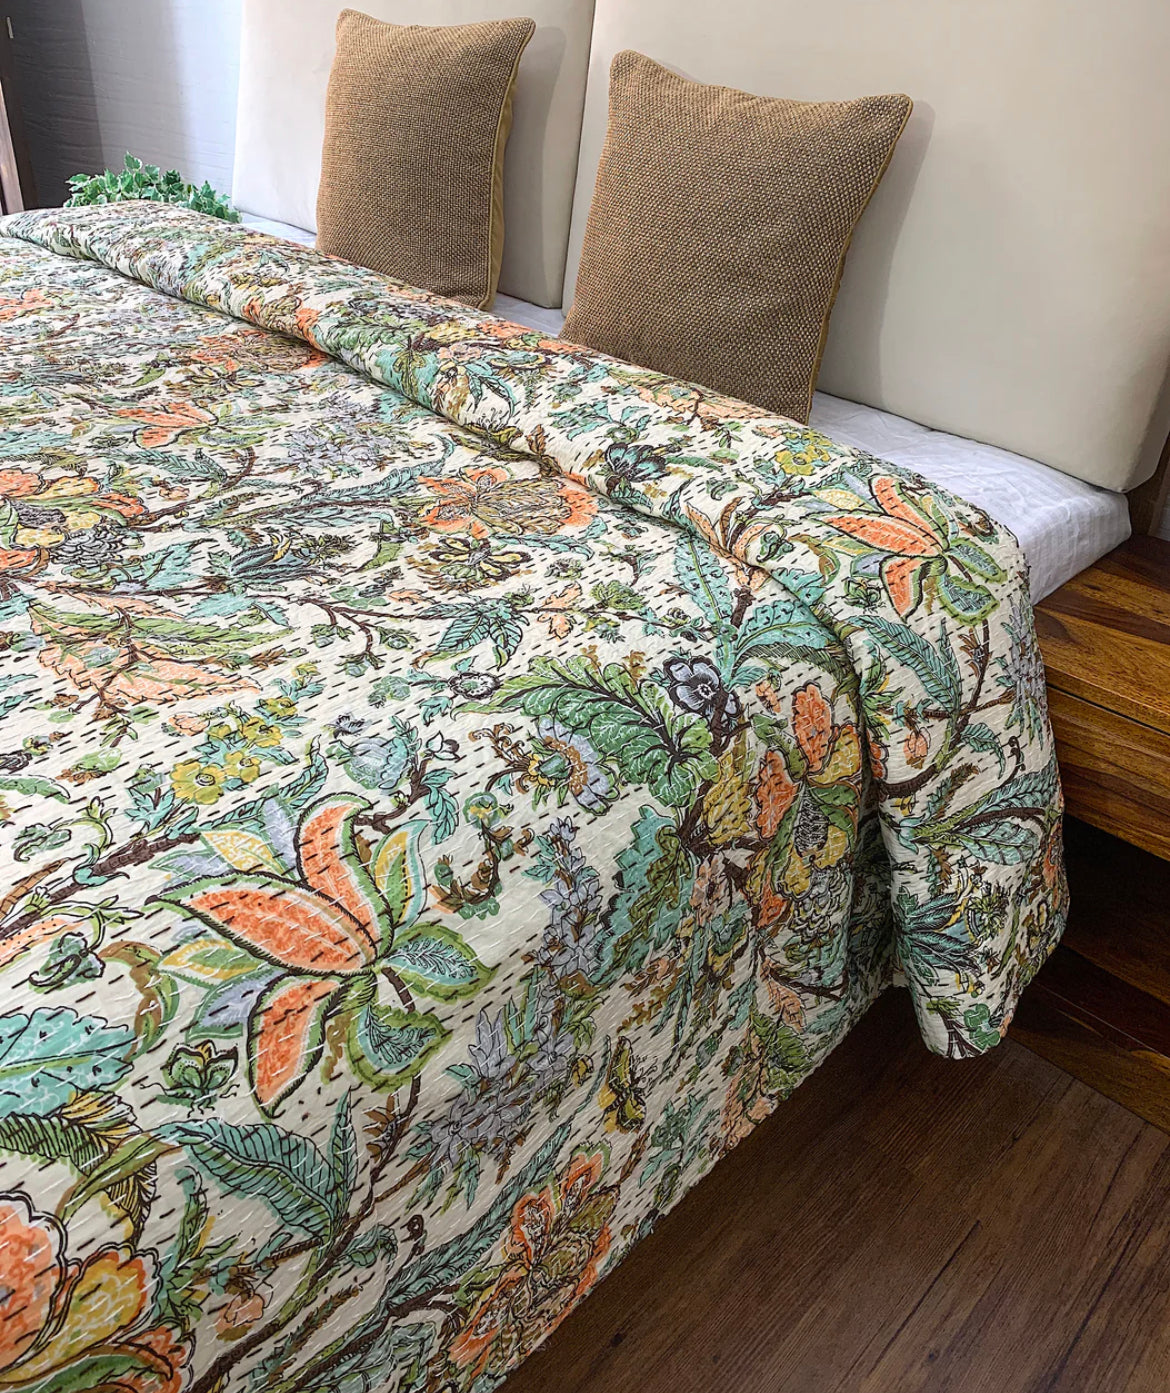 Crystal Bloom Home Kantha Stitch Cotton Bedcover